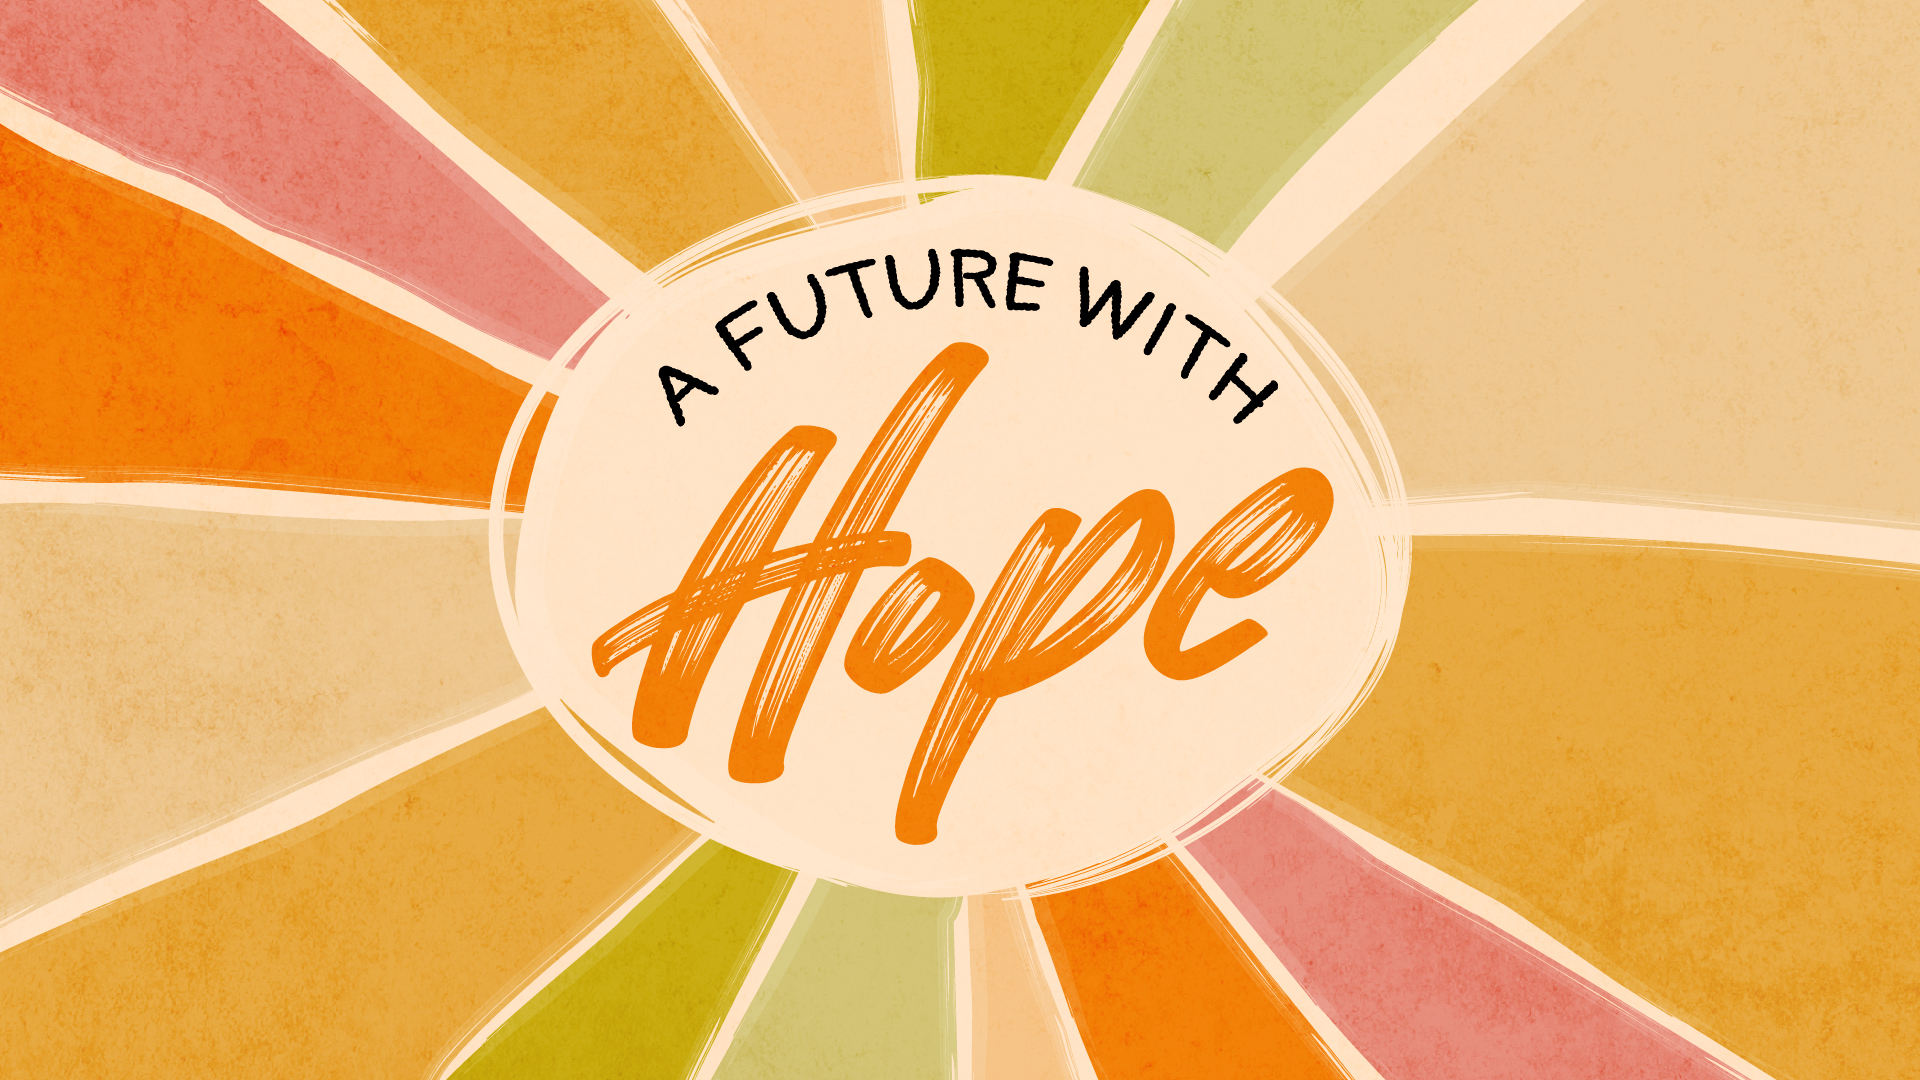 Claiming a Future With Hope